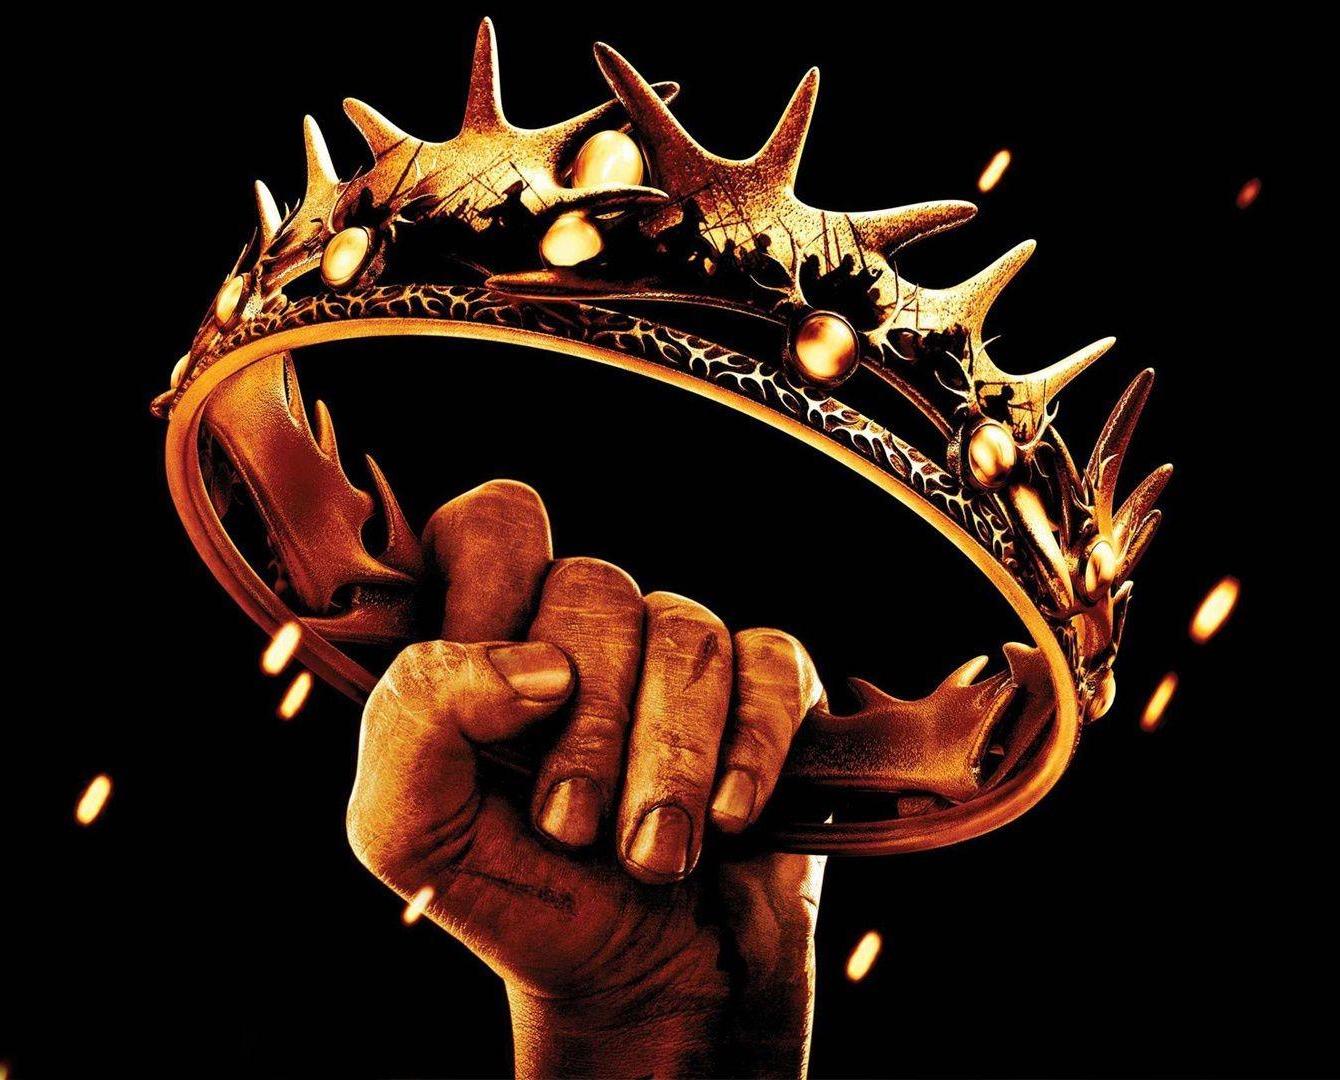 A painting of the hand holding the gold crown